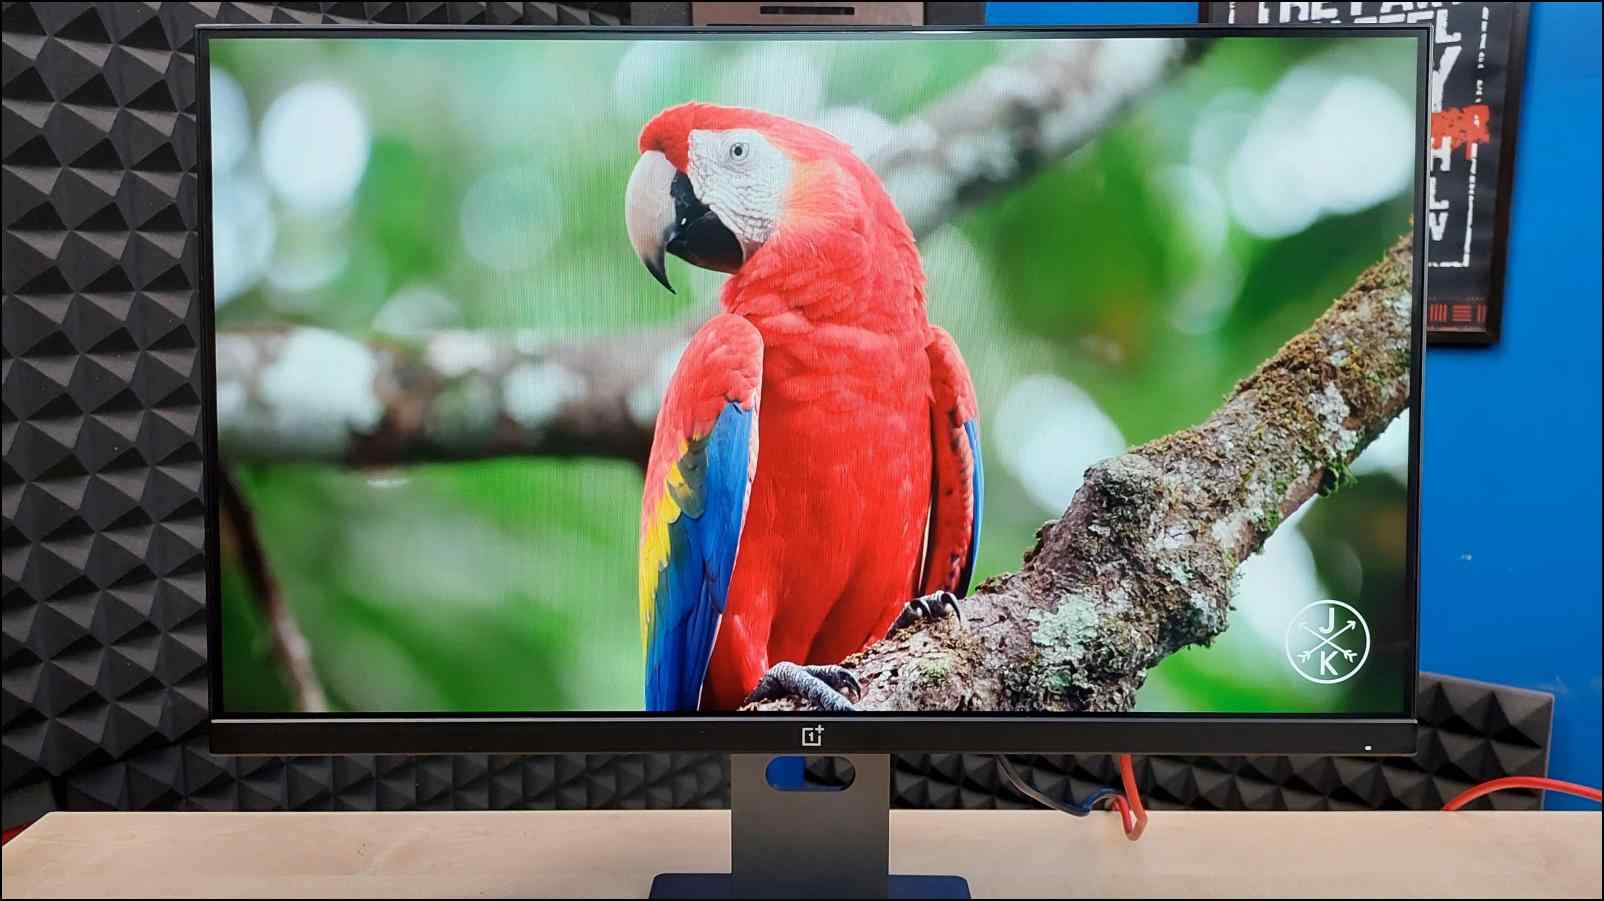 OnePlus E24 Monitor Review